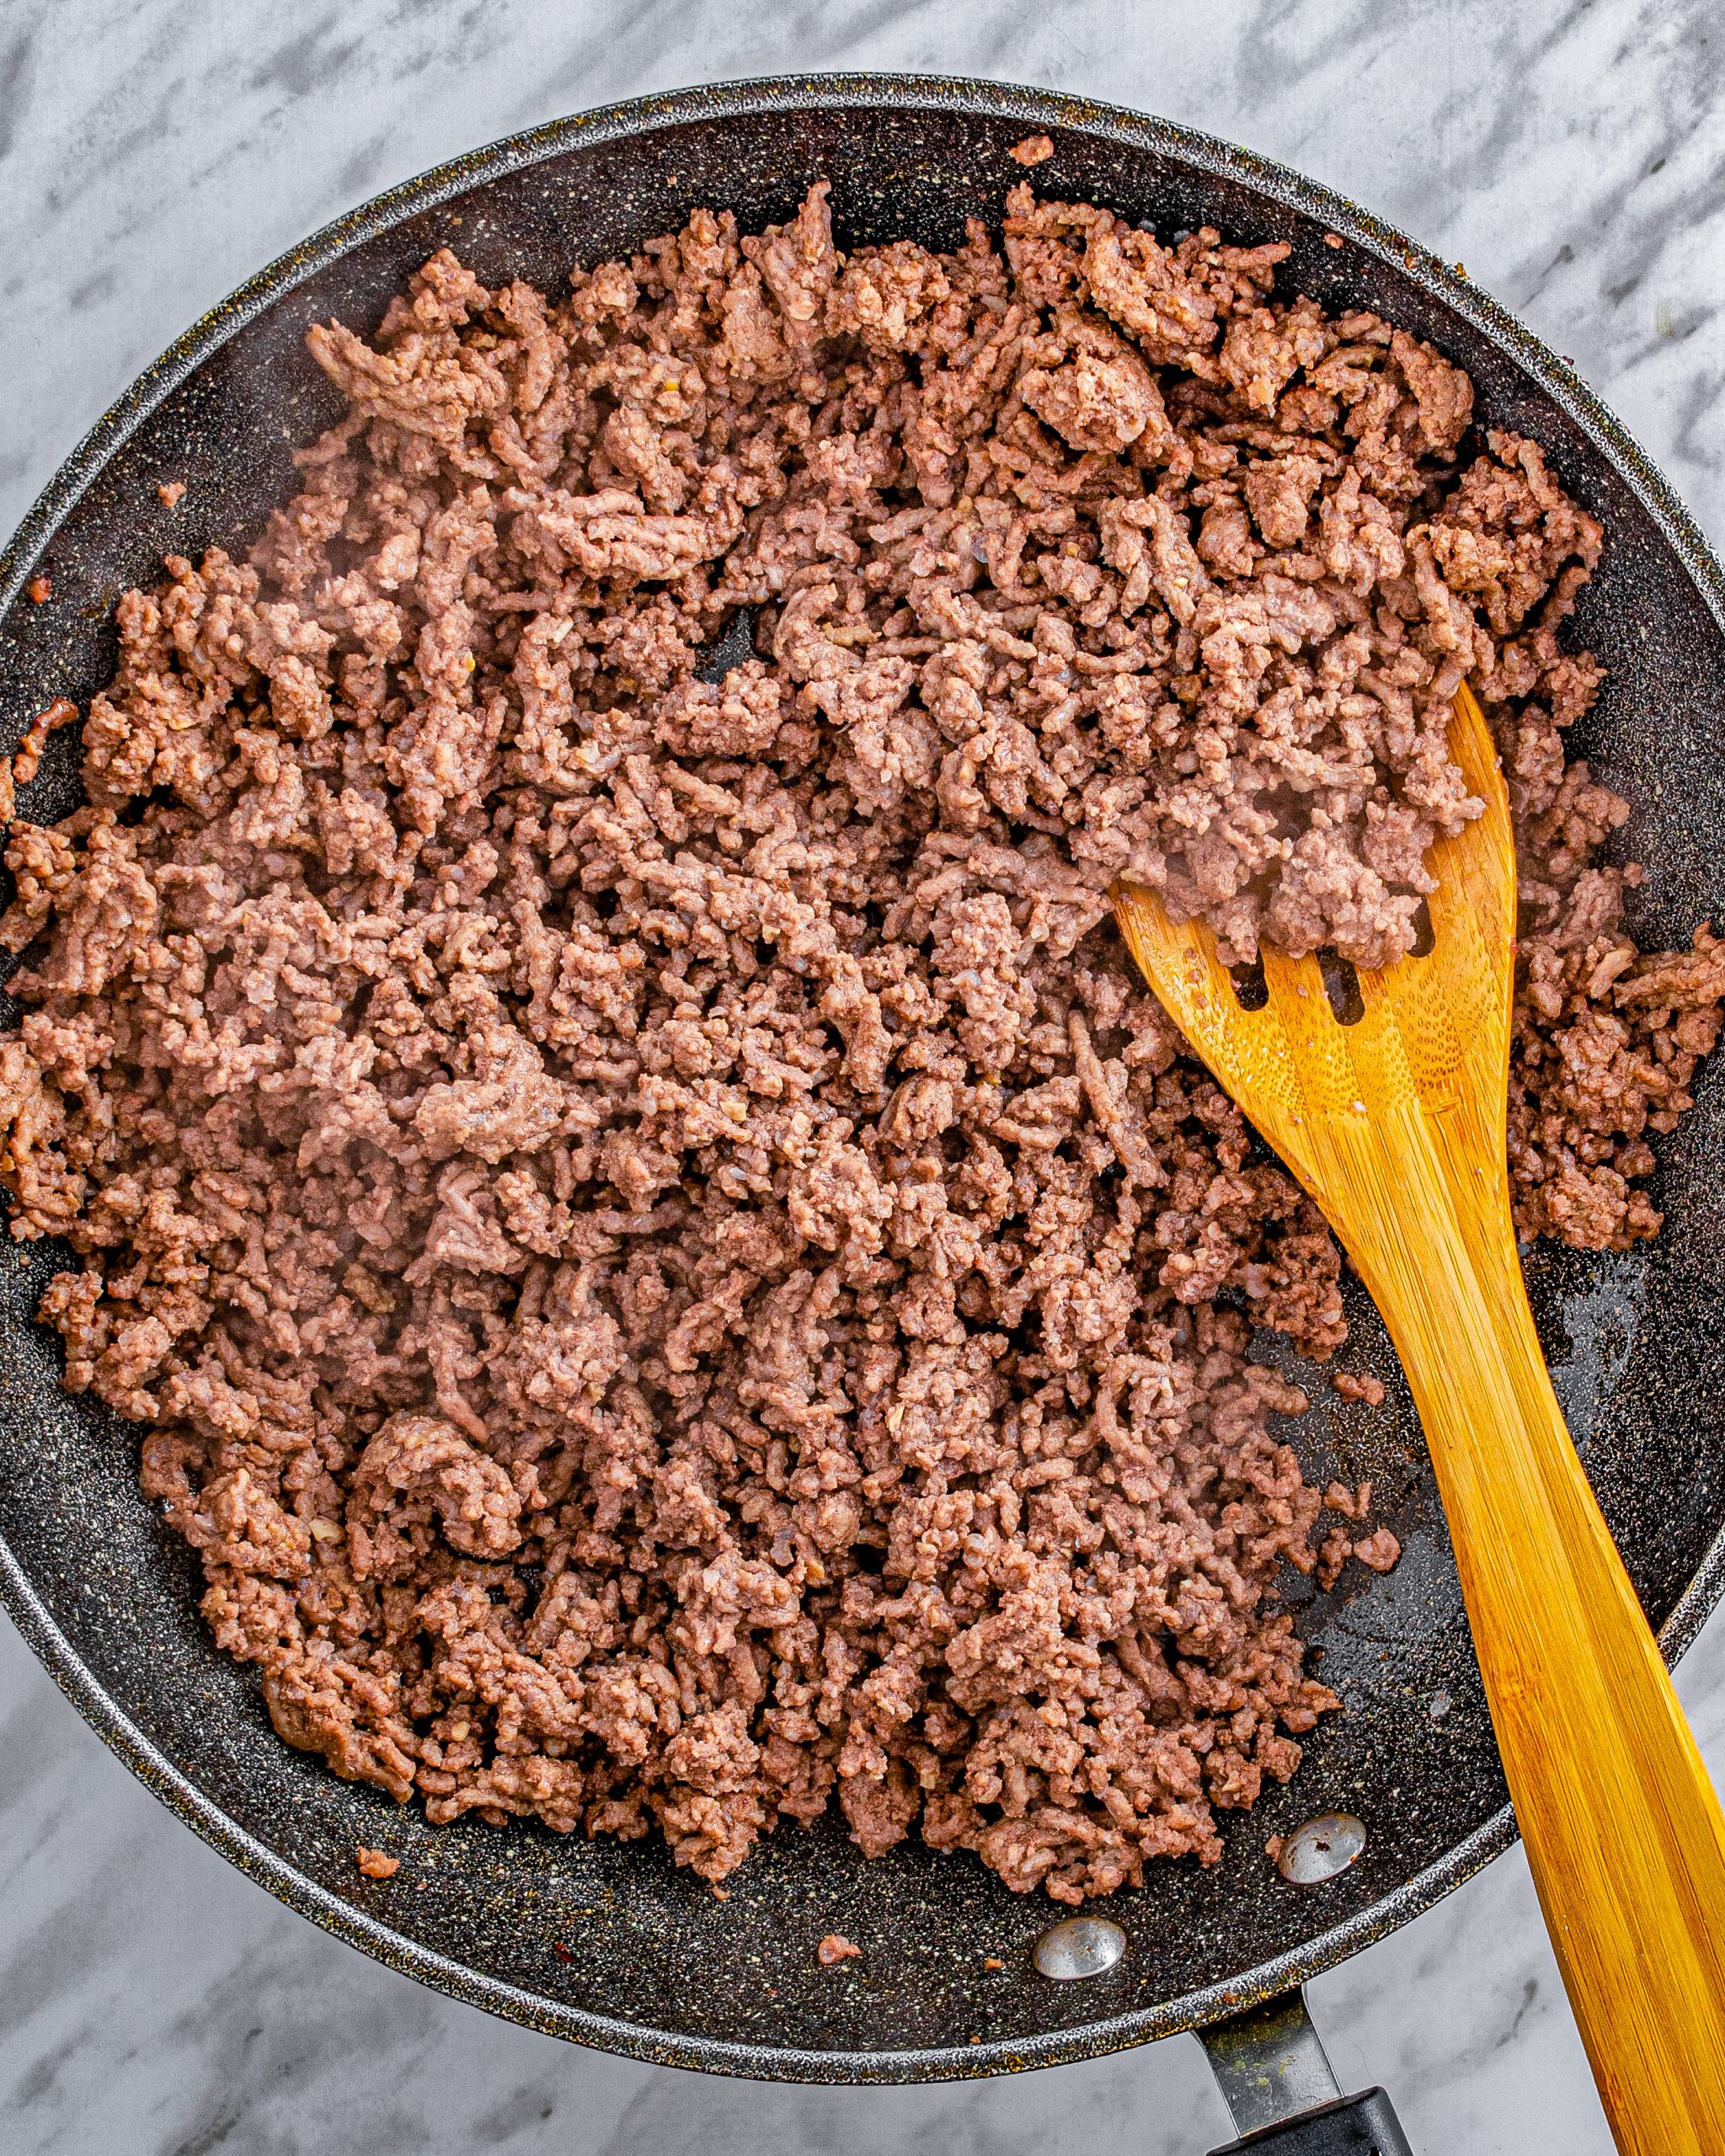 Add the ground beef to a skillet over medium-high heat